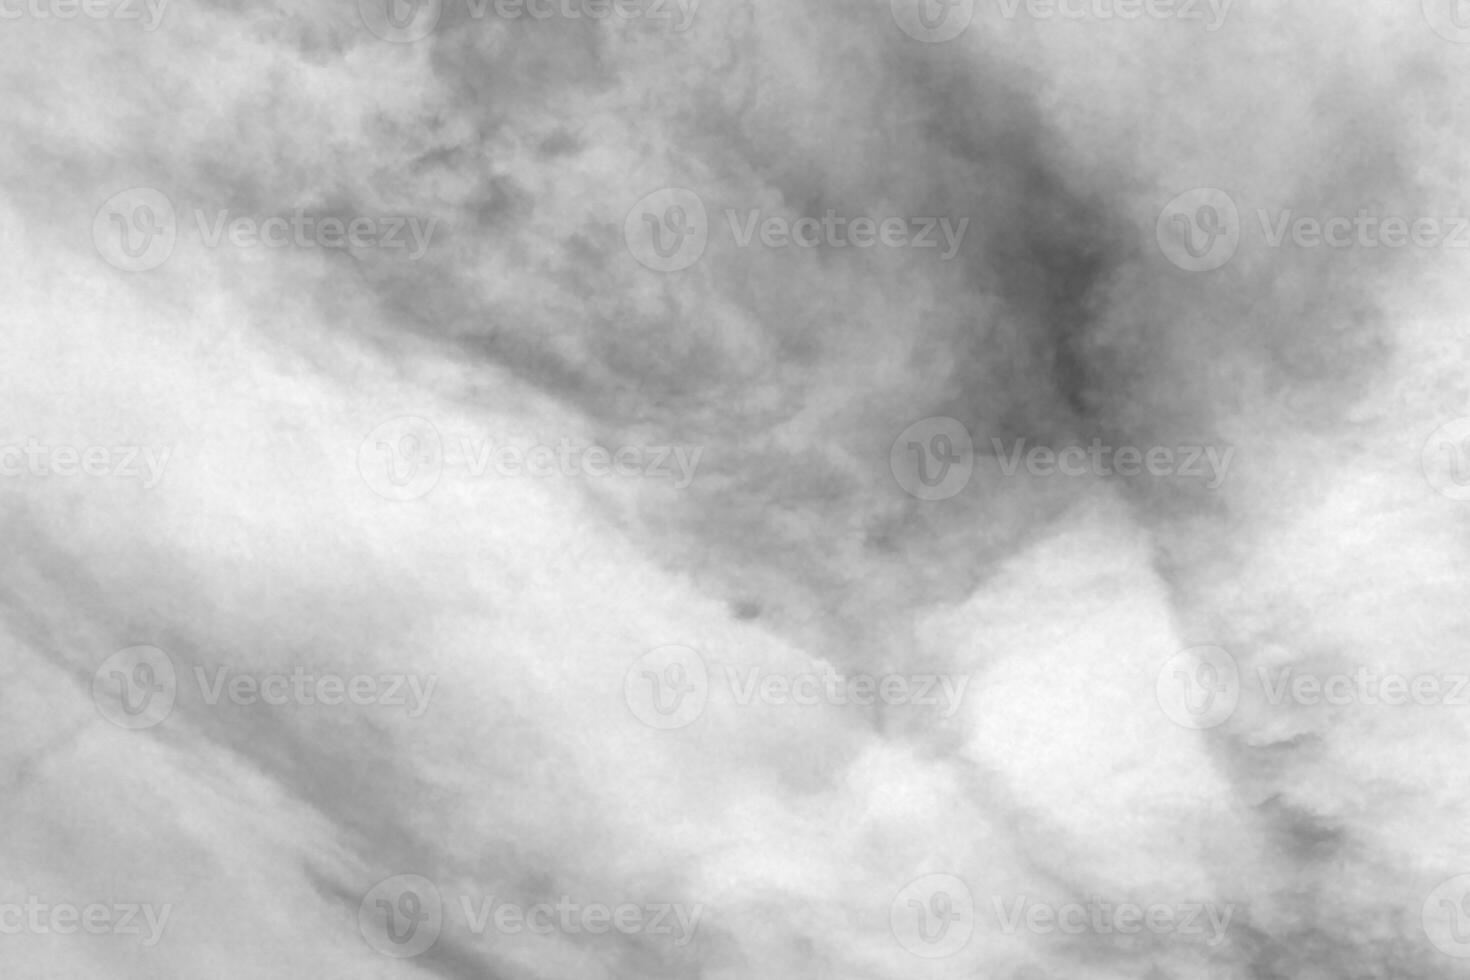 black cloud textured and sky isolated on white background photo